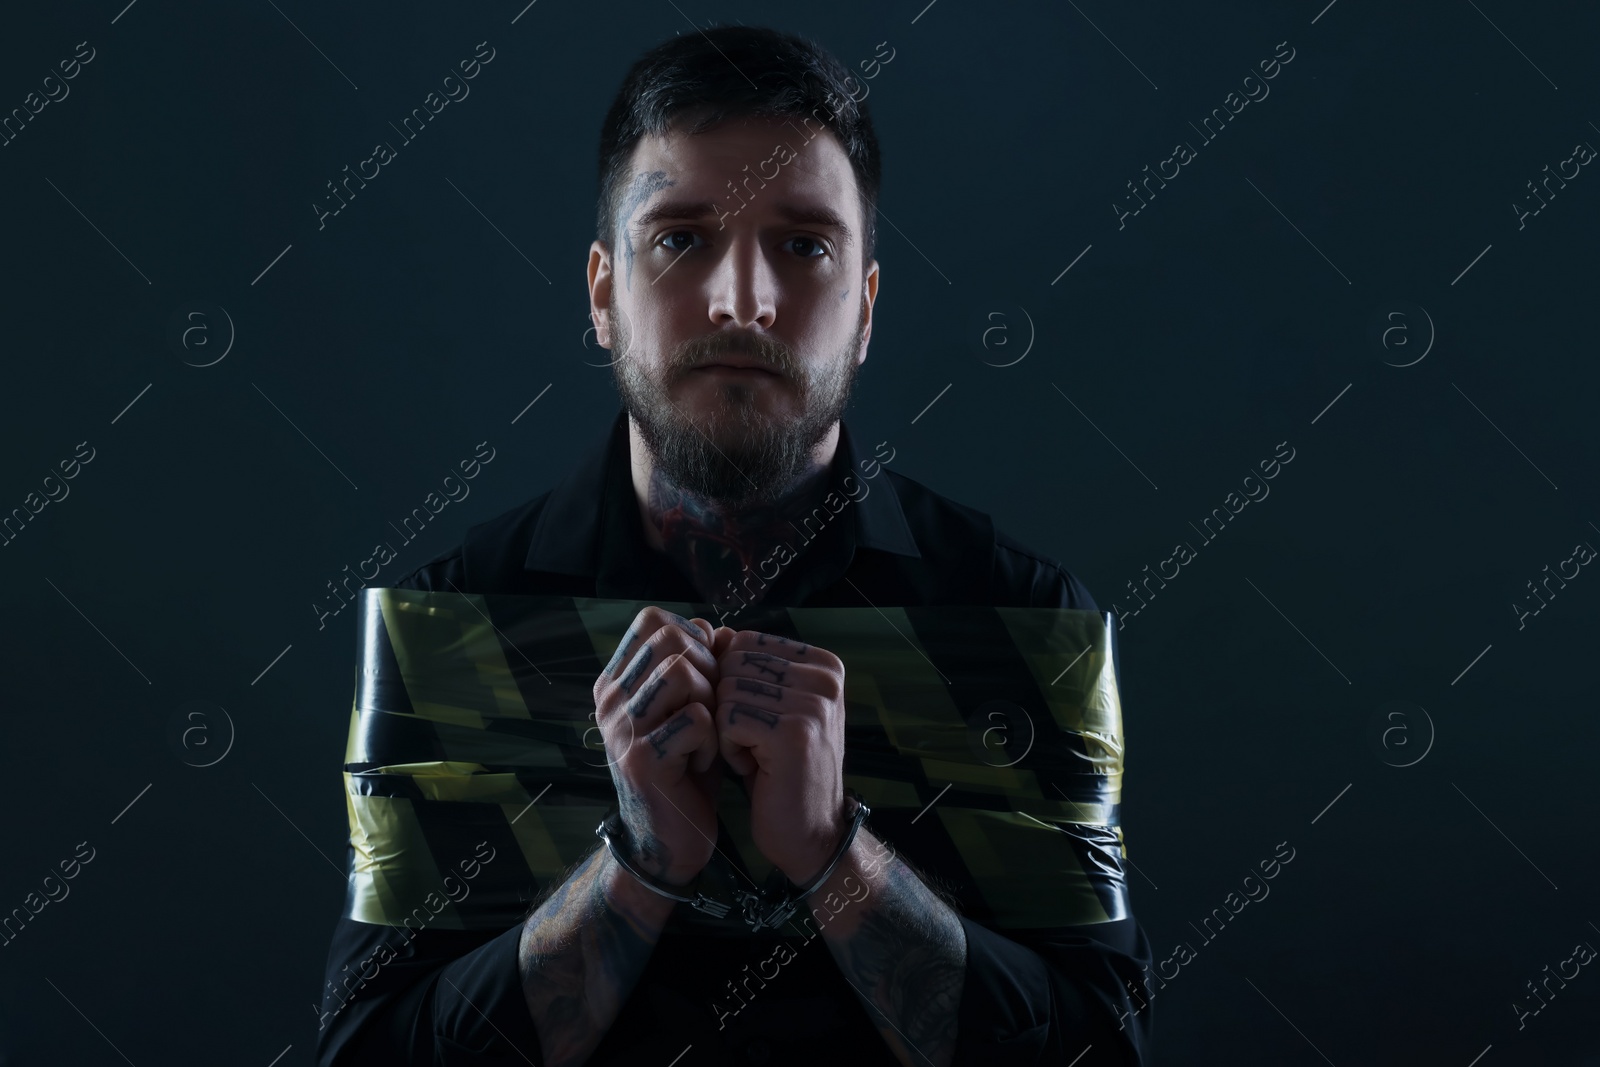 Photo of Man taped up and taken hostage on dark background